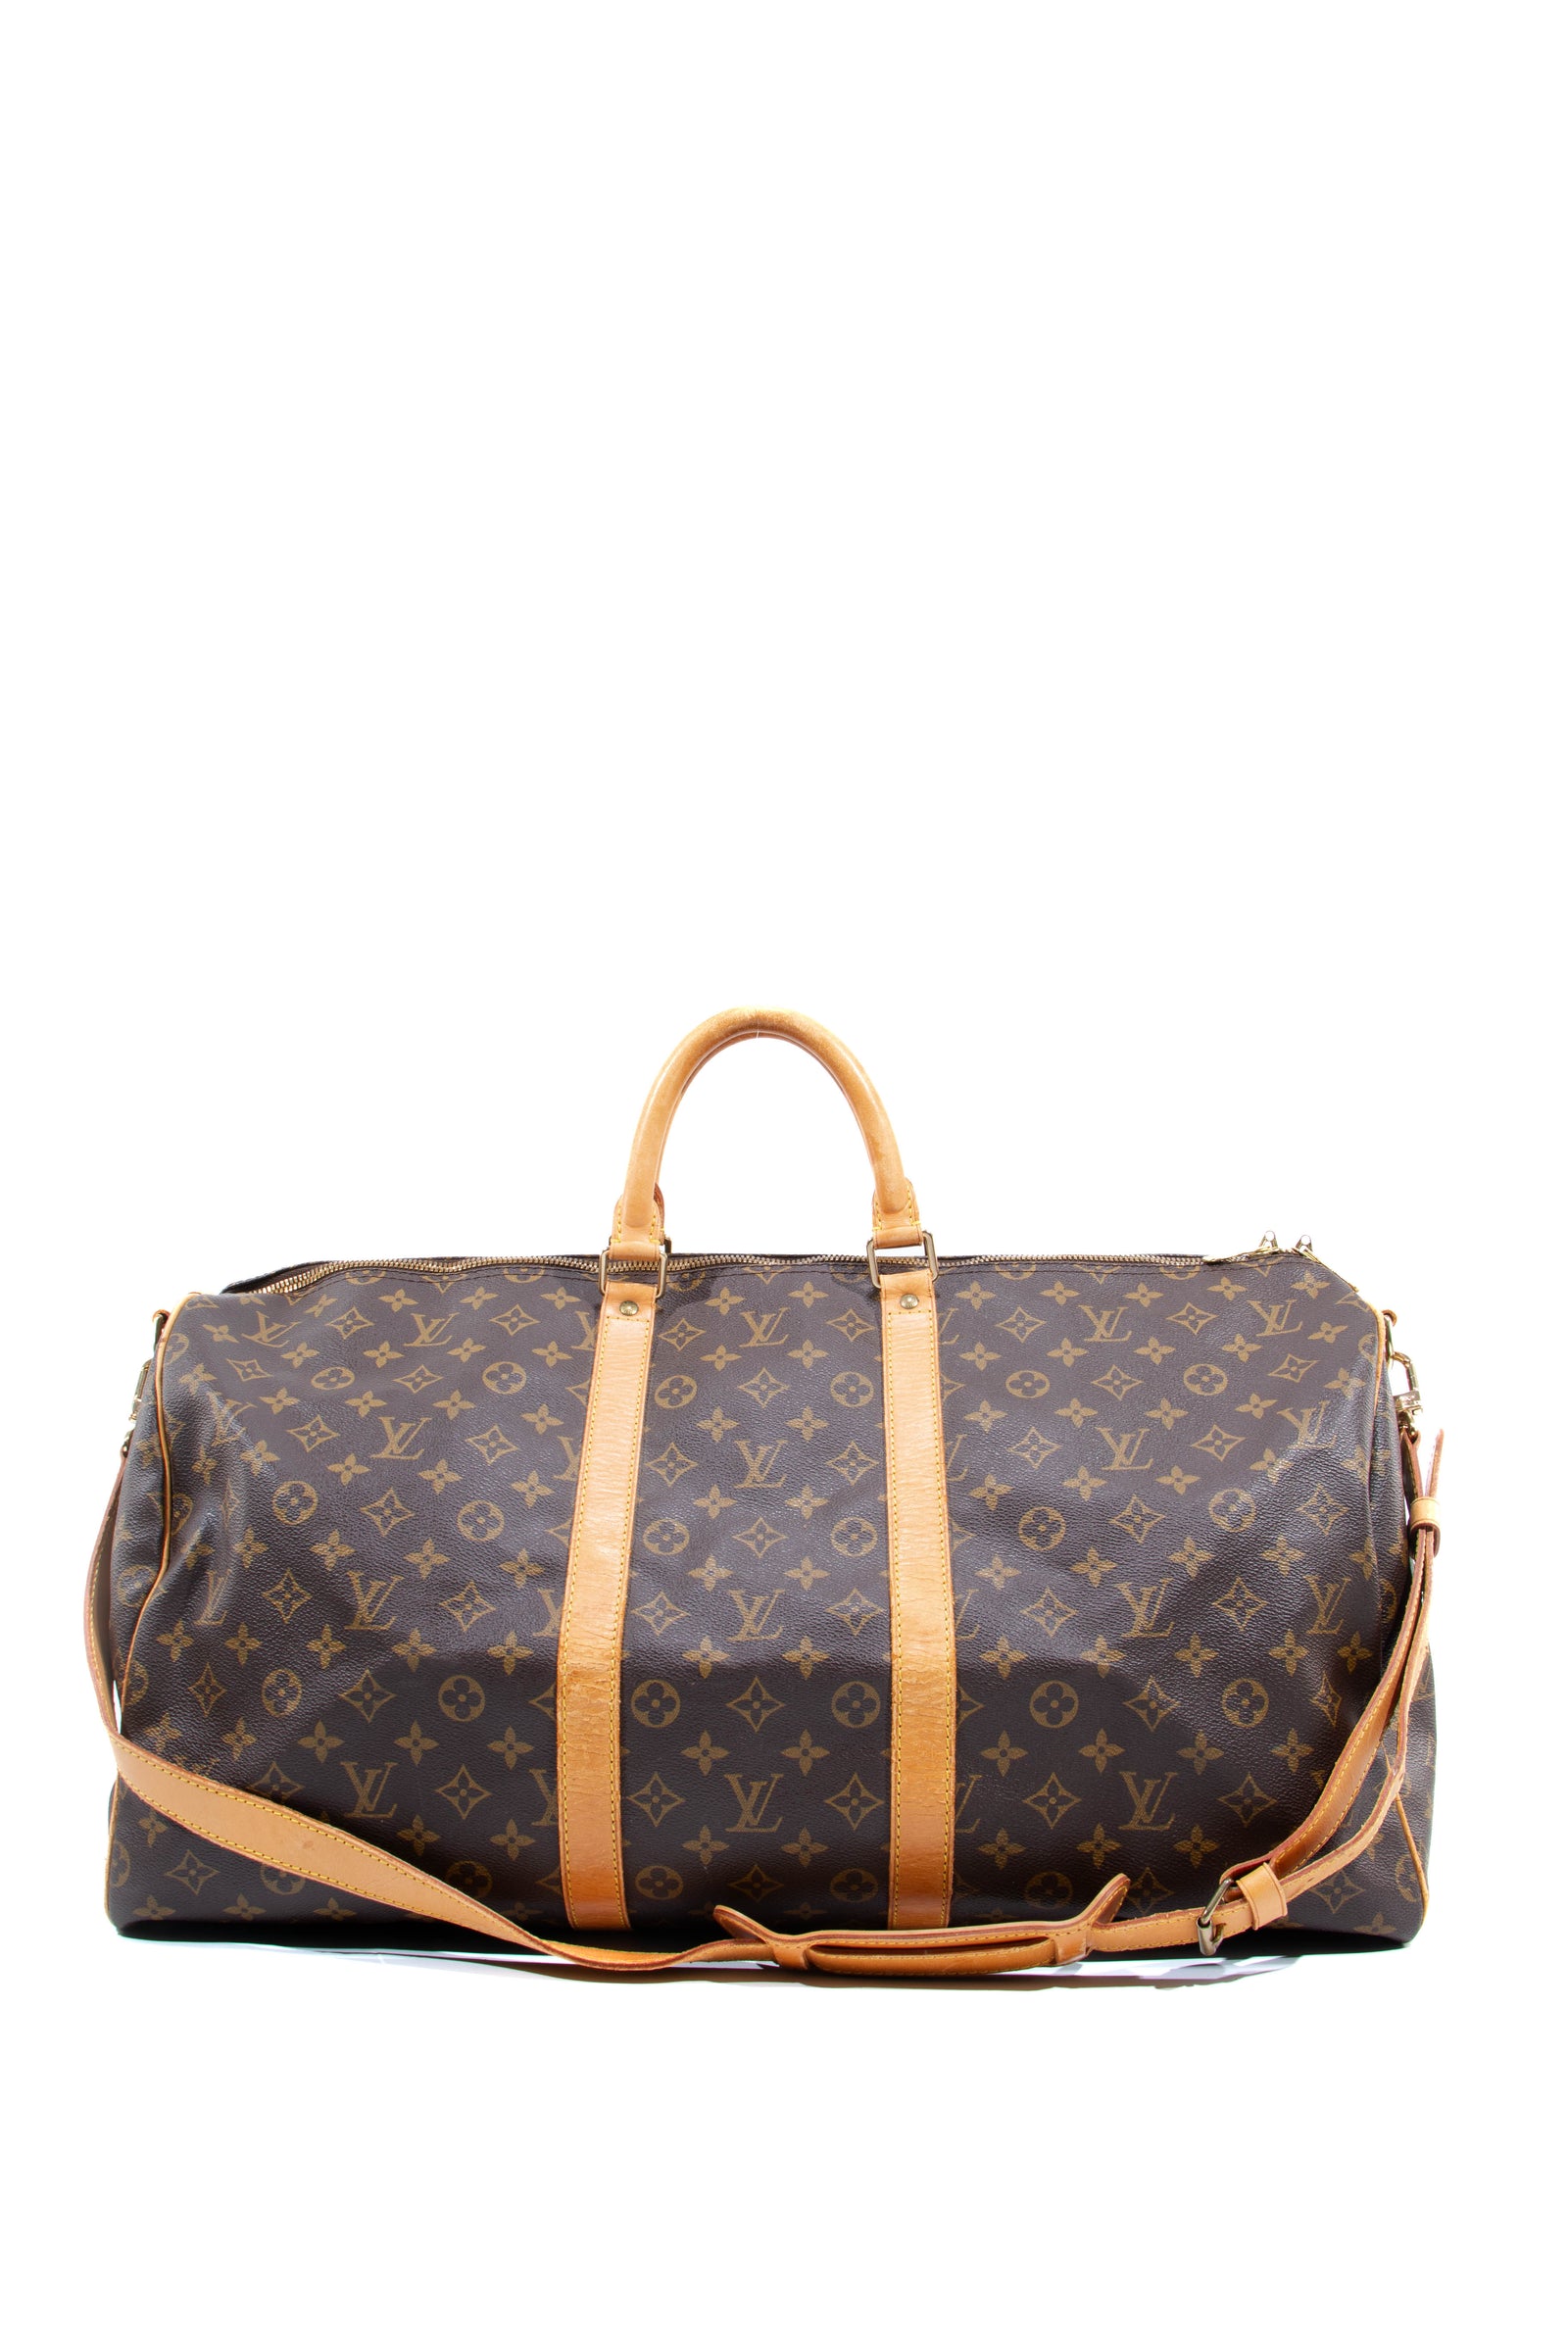 LOUIS VUITTON Monogram Giant By The Pool Keepall Bandouliere 45